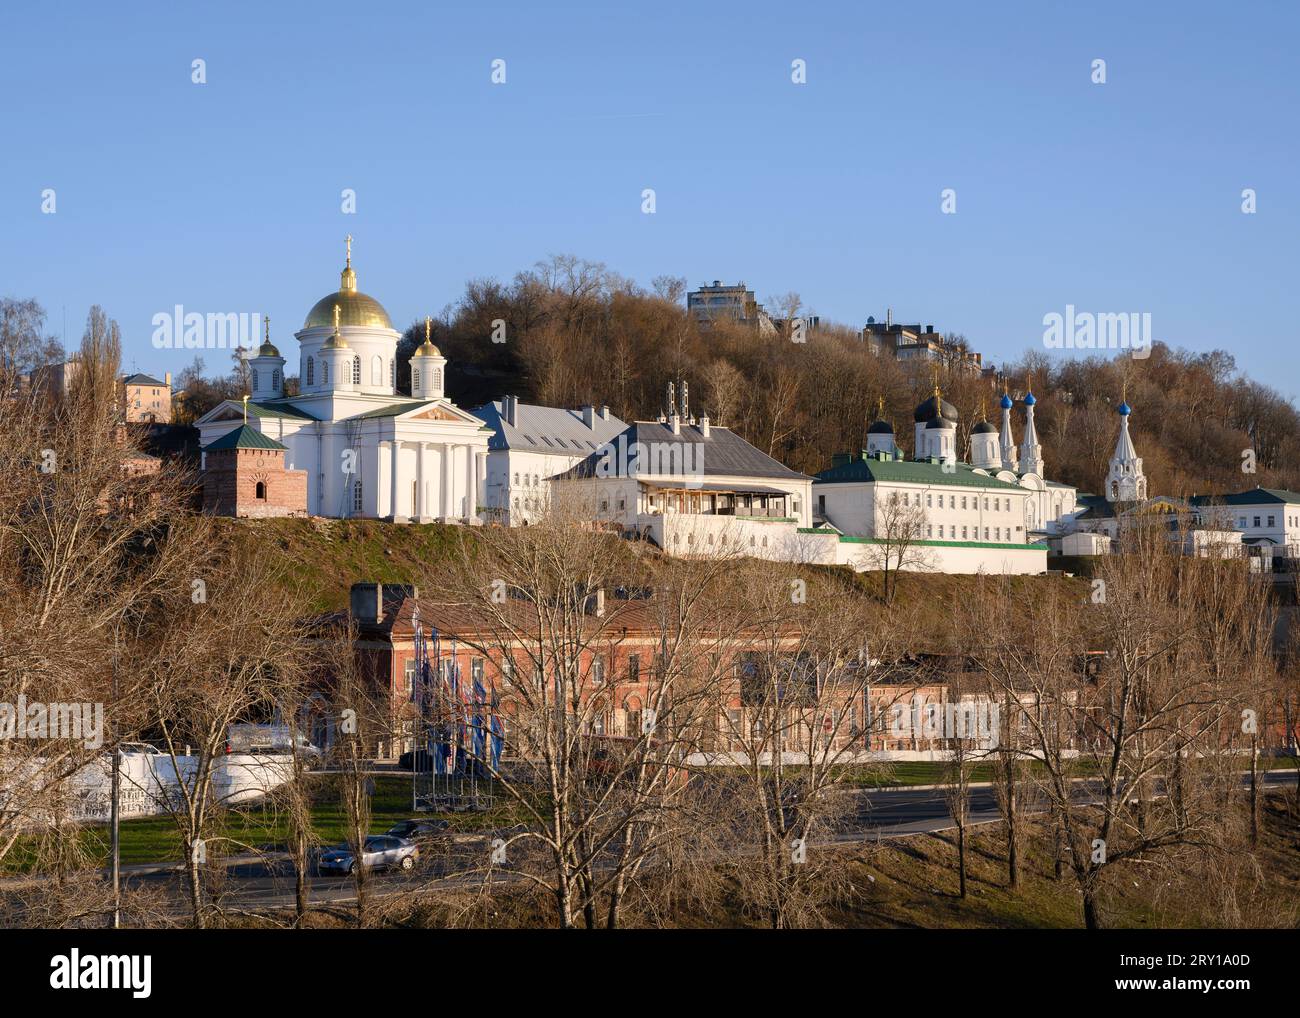 View of the Christian Annunciation Monastery of Nizhny Novgorod, founded in 1221, at sunset in spring Stock Photo